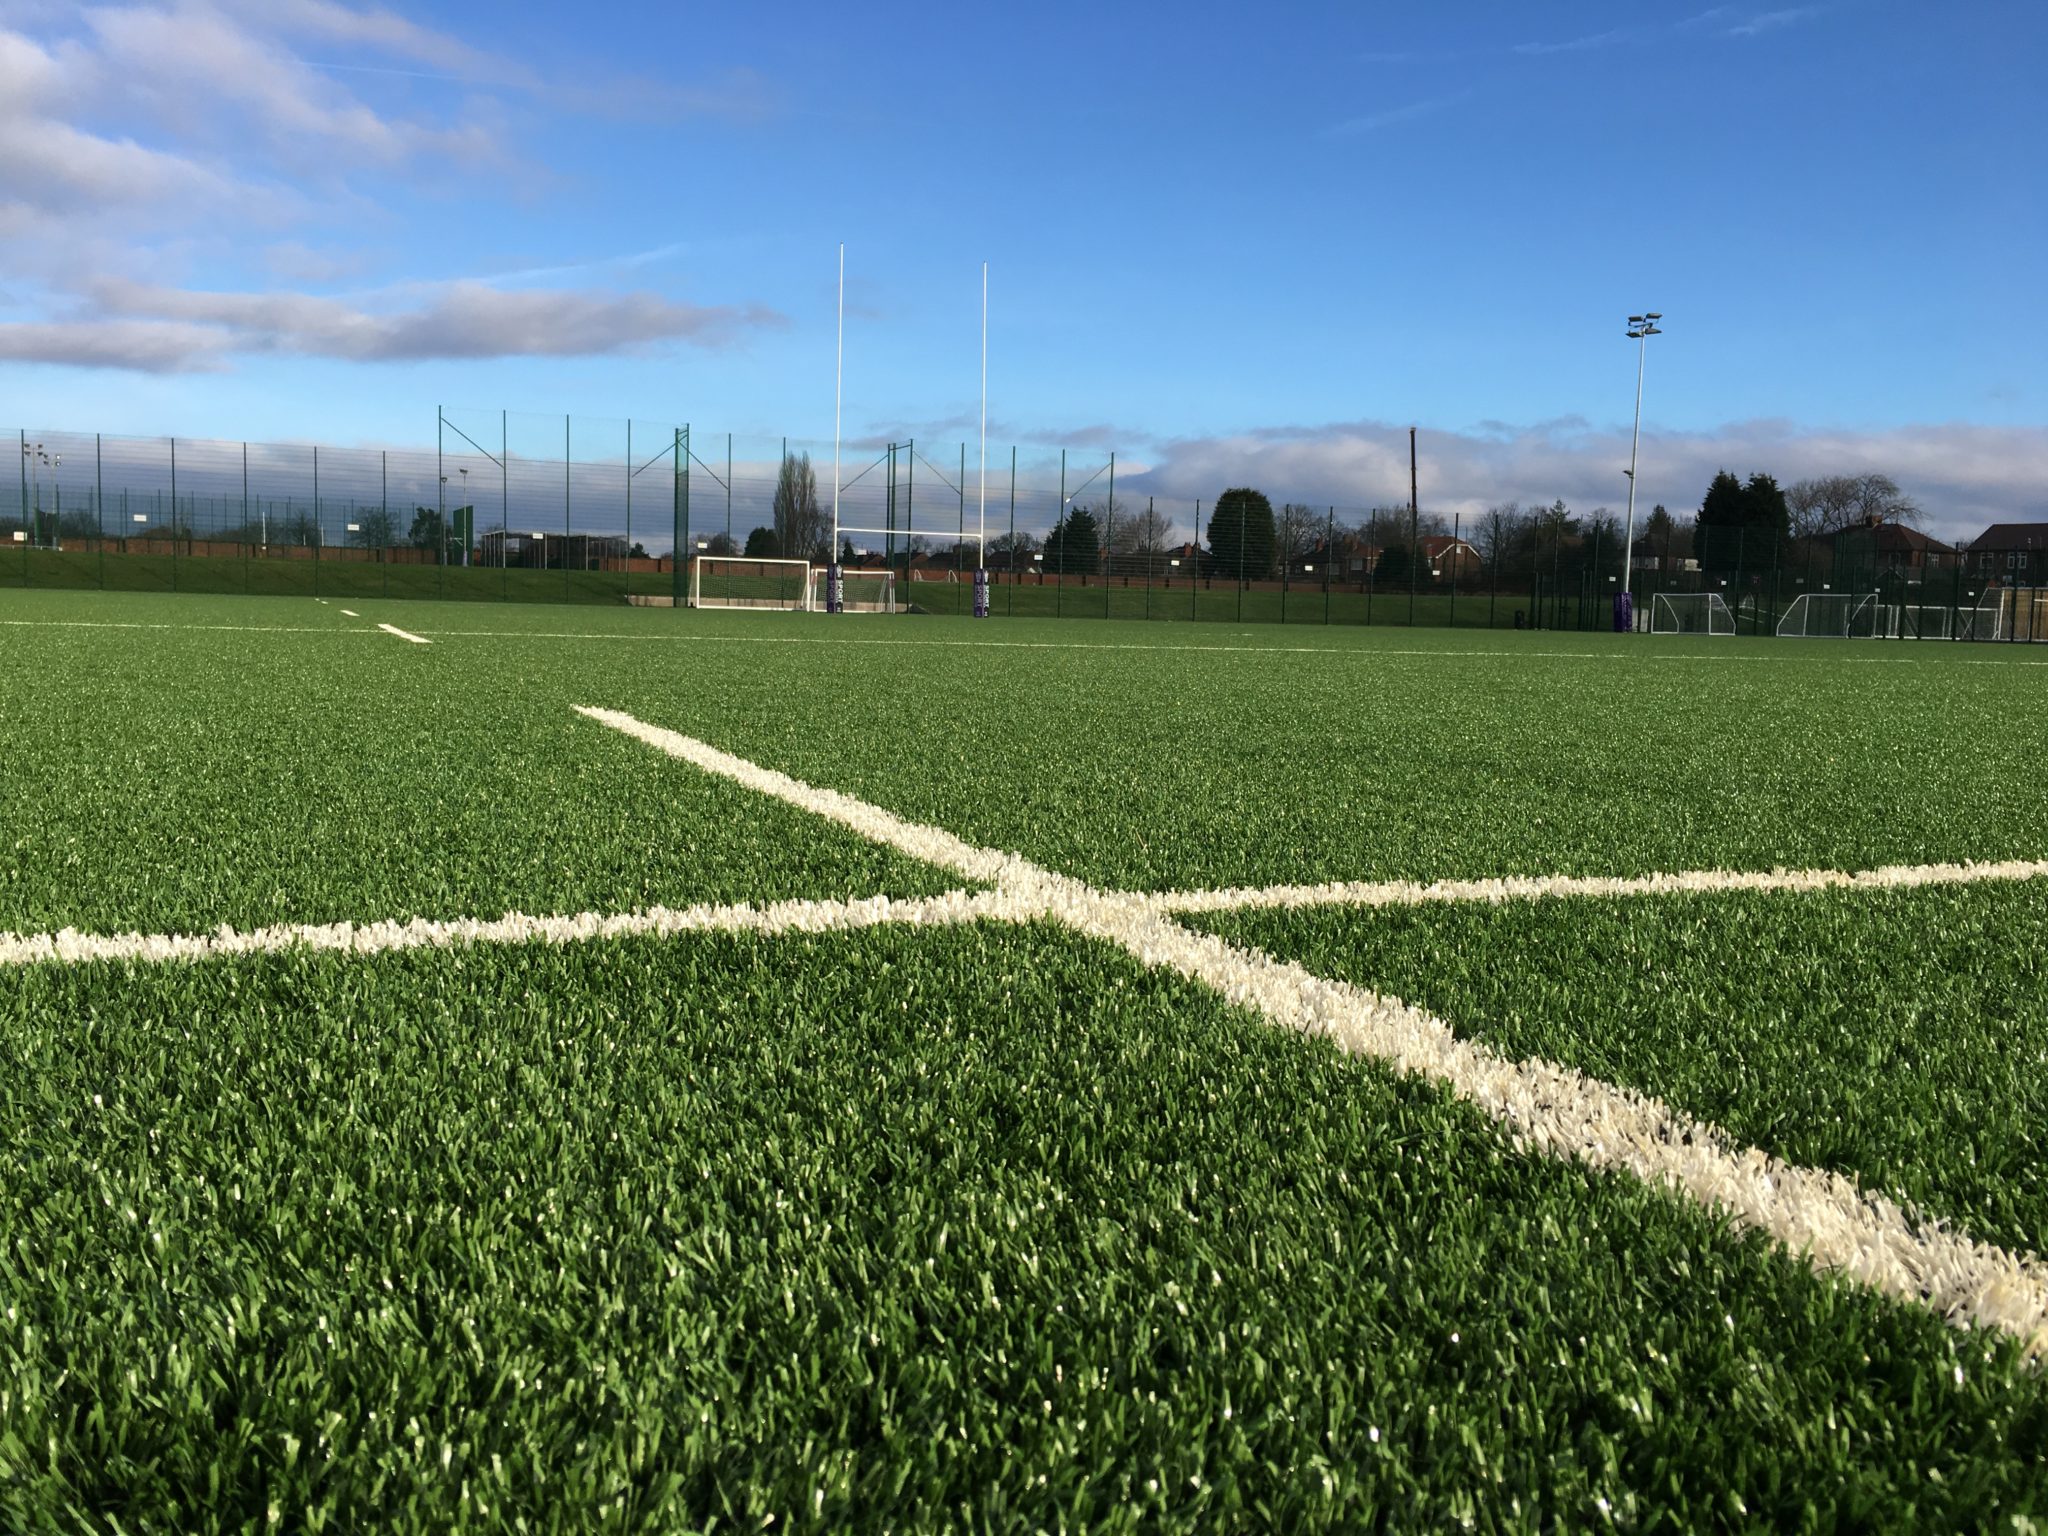 It also marks the first £ 2 million-plus framework project for SIS Pitches....